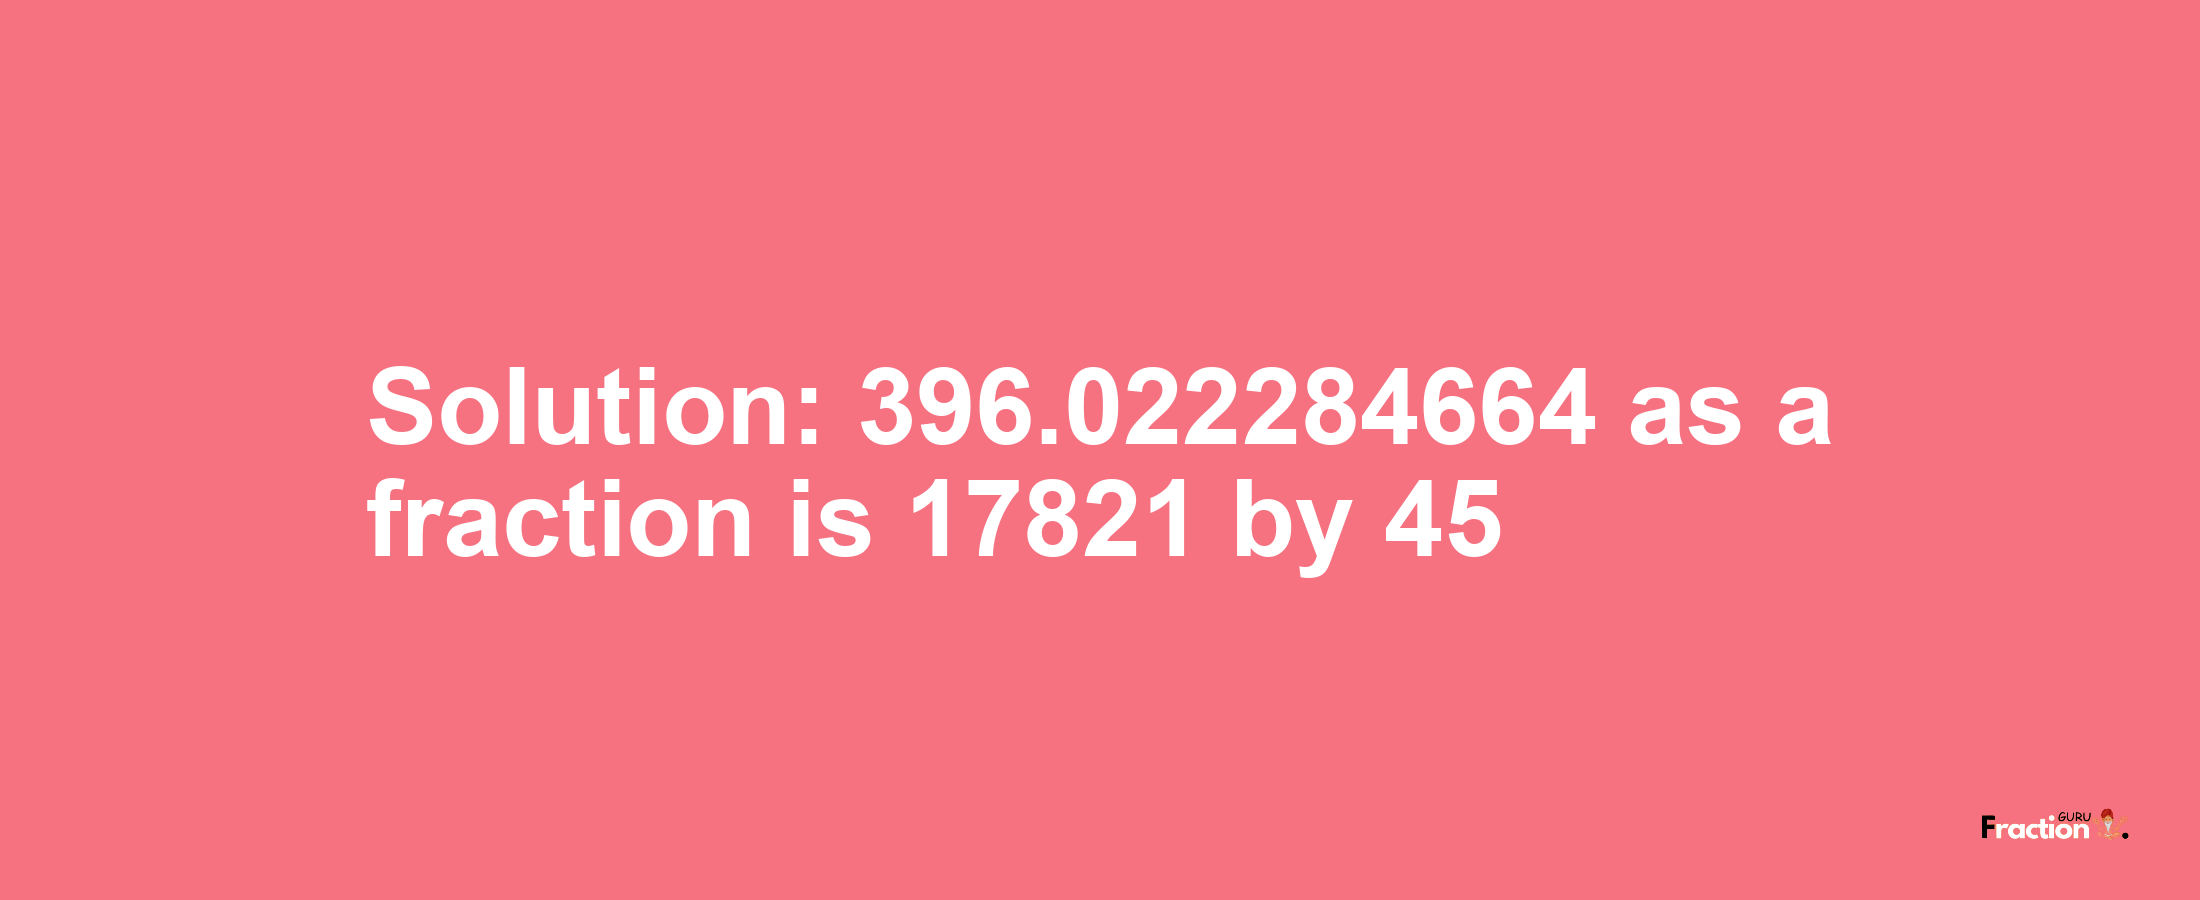 Solution:396.022284664 as a fraction is 17821/45